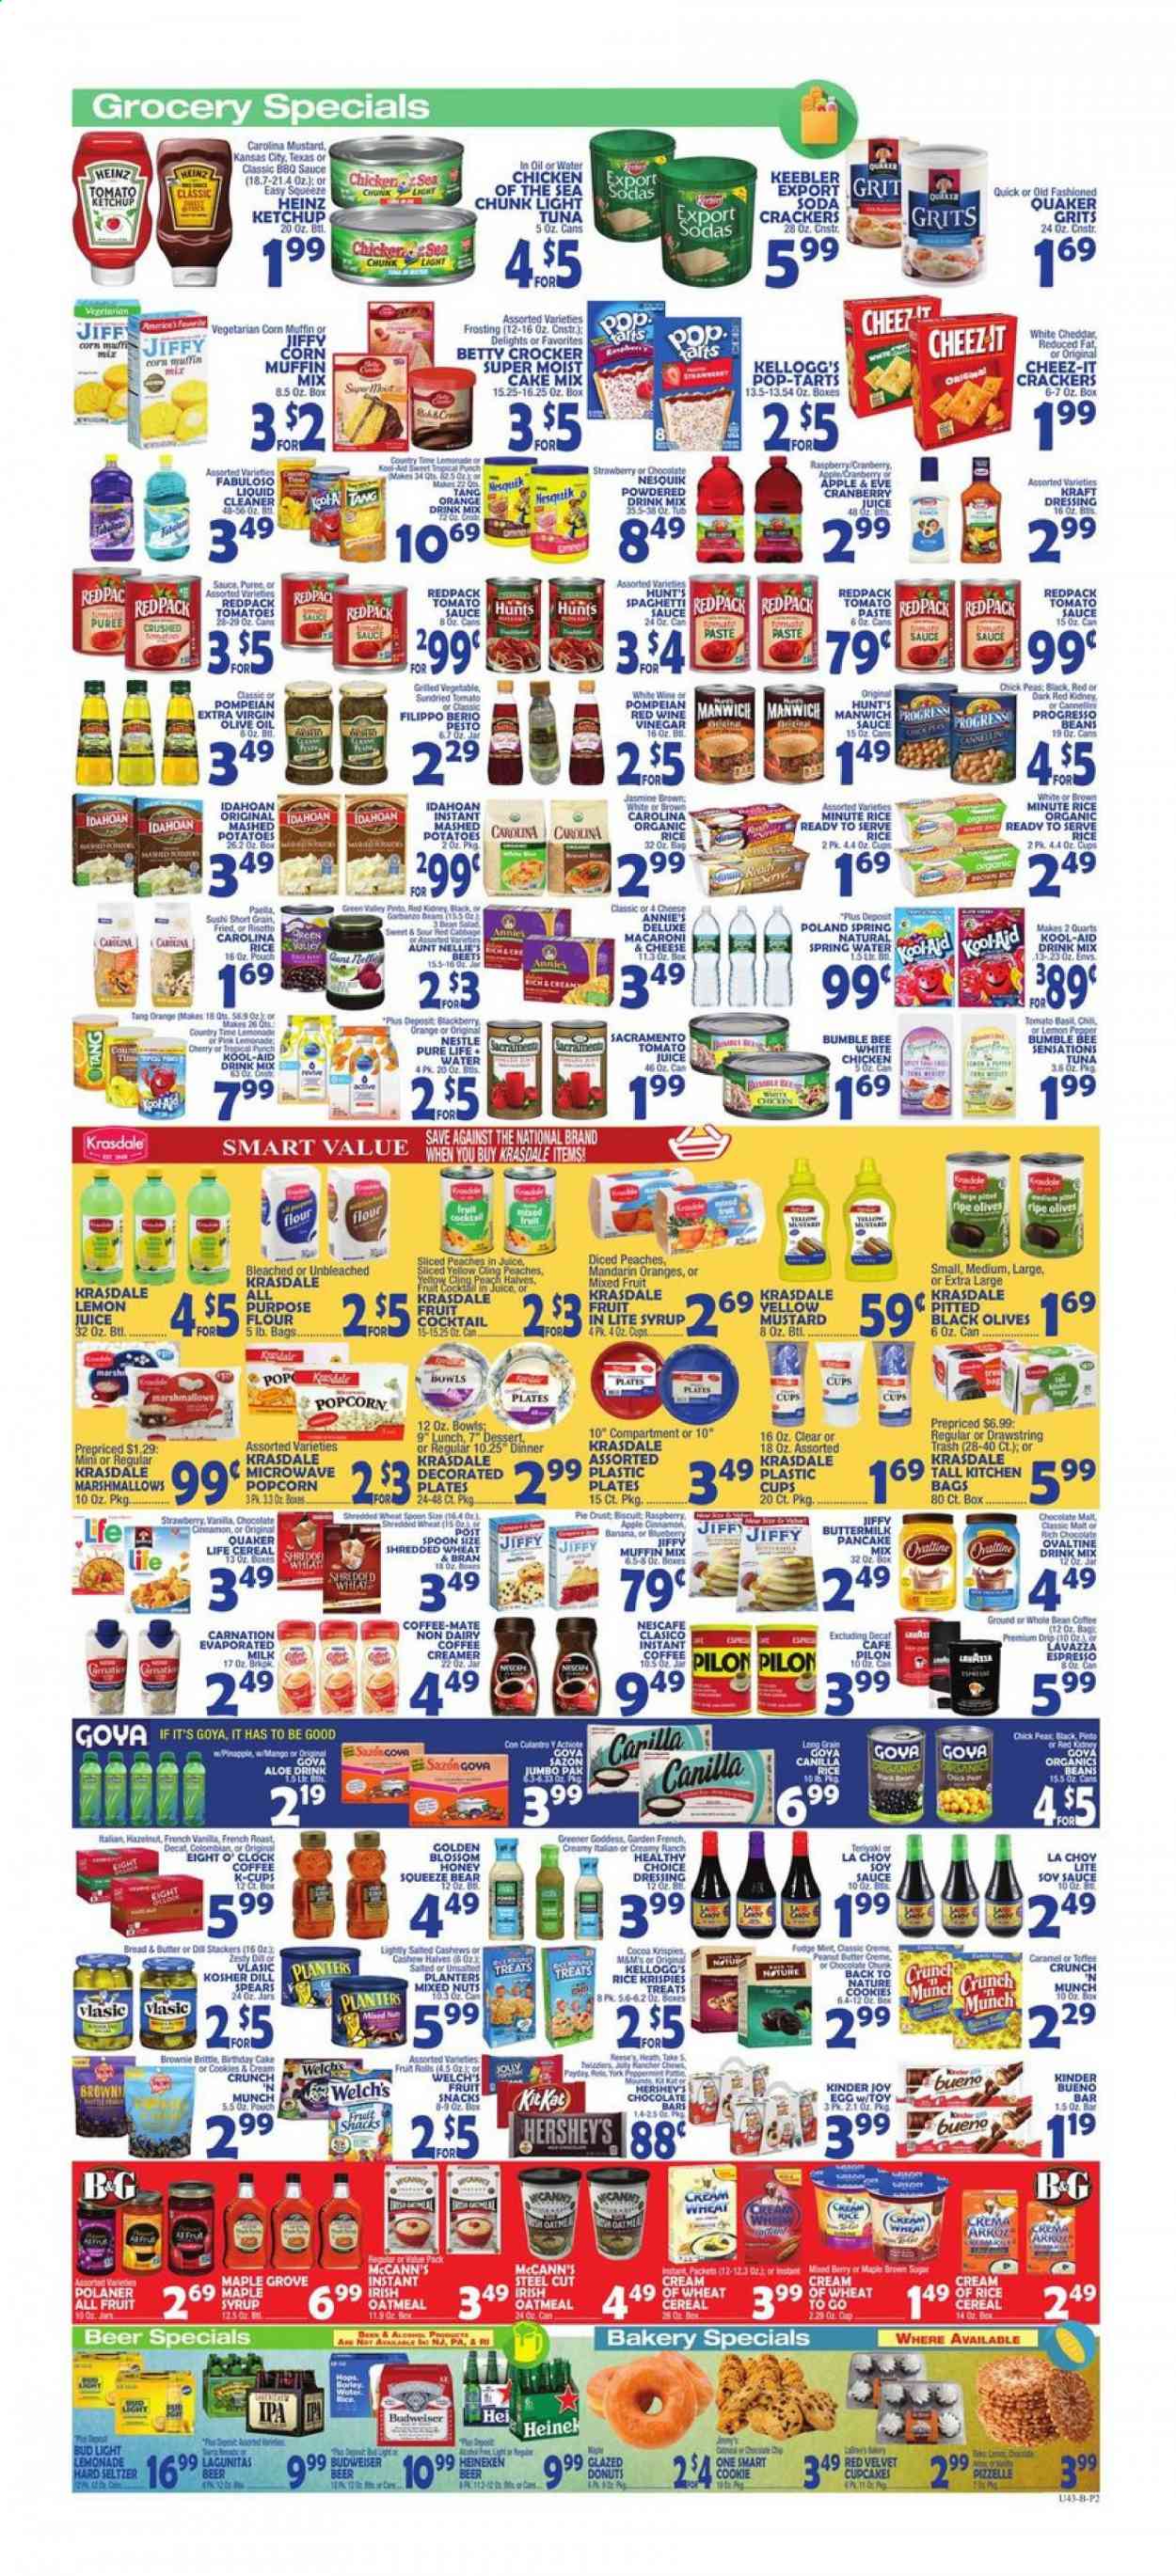 thumbnail - Bravo Supermarkets Flyer - 01/22/2021 - 01/28/2021 - Sales products - Budweiser, bread, cake mix, cupcake, pie, brownies, donut, pancakes, muffin, oranges, tuna, macaroni & cheese, mashed potatoes, risotto, Quaker, Progresso, Welch's, Healthy Choice, Annie's, Kraft®, cheddar, buttermilk, Coffee-Mate, evaporated milk, eggs, Blossom, creamer, coffee and tea creamer, dip, Reese's, corn, peas, paella, cookies, marshmallows, Nestlé, chocolate, Kinder Joy, KitKat, crackers, Kellogg's, Kinder Bueno, Nesquik, Pop-Tarts, fruit snack, Keebler, popcorn, Cheez-It, all purpose flour, cane sugar, flour, frosting, pie crust, oatmeal, grits, malt, corn muffin, mandarines, tomato paste, Heinz, olives, light tuna, Chicken of the Sea, Goya, Manwich, cereals, Cream of Wheat, Rice Krispies, esponja, dill, cinnamon, BBQ sauce, mustard, soy sauce, tomato sauce, ketchup, pesto, dressing, teriyaki sauce, extra virgin olive oil, vinegar, olive oil, maple syrup, honey, peanut butter, syrup, cashews, dried tomatoes, mixed nuts, Planters, cranberry juice, lemonade, tomato juice, soda, Country Time, seltzer water, spring water, lemon juice, instant coffee, Nescafé, coffee capsules, K-Cups, Lavazza, punch, Hard Seltzer, beer, Bud Light, Heineken, IPA, liquid cleaner, Fabuloso. Page 2.